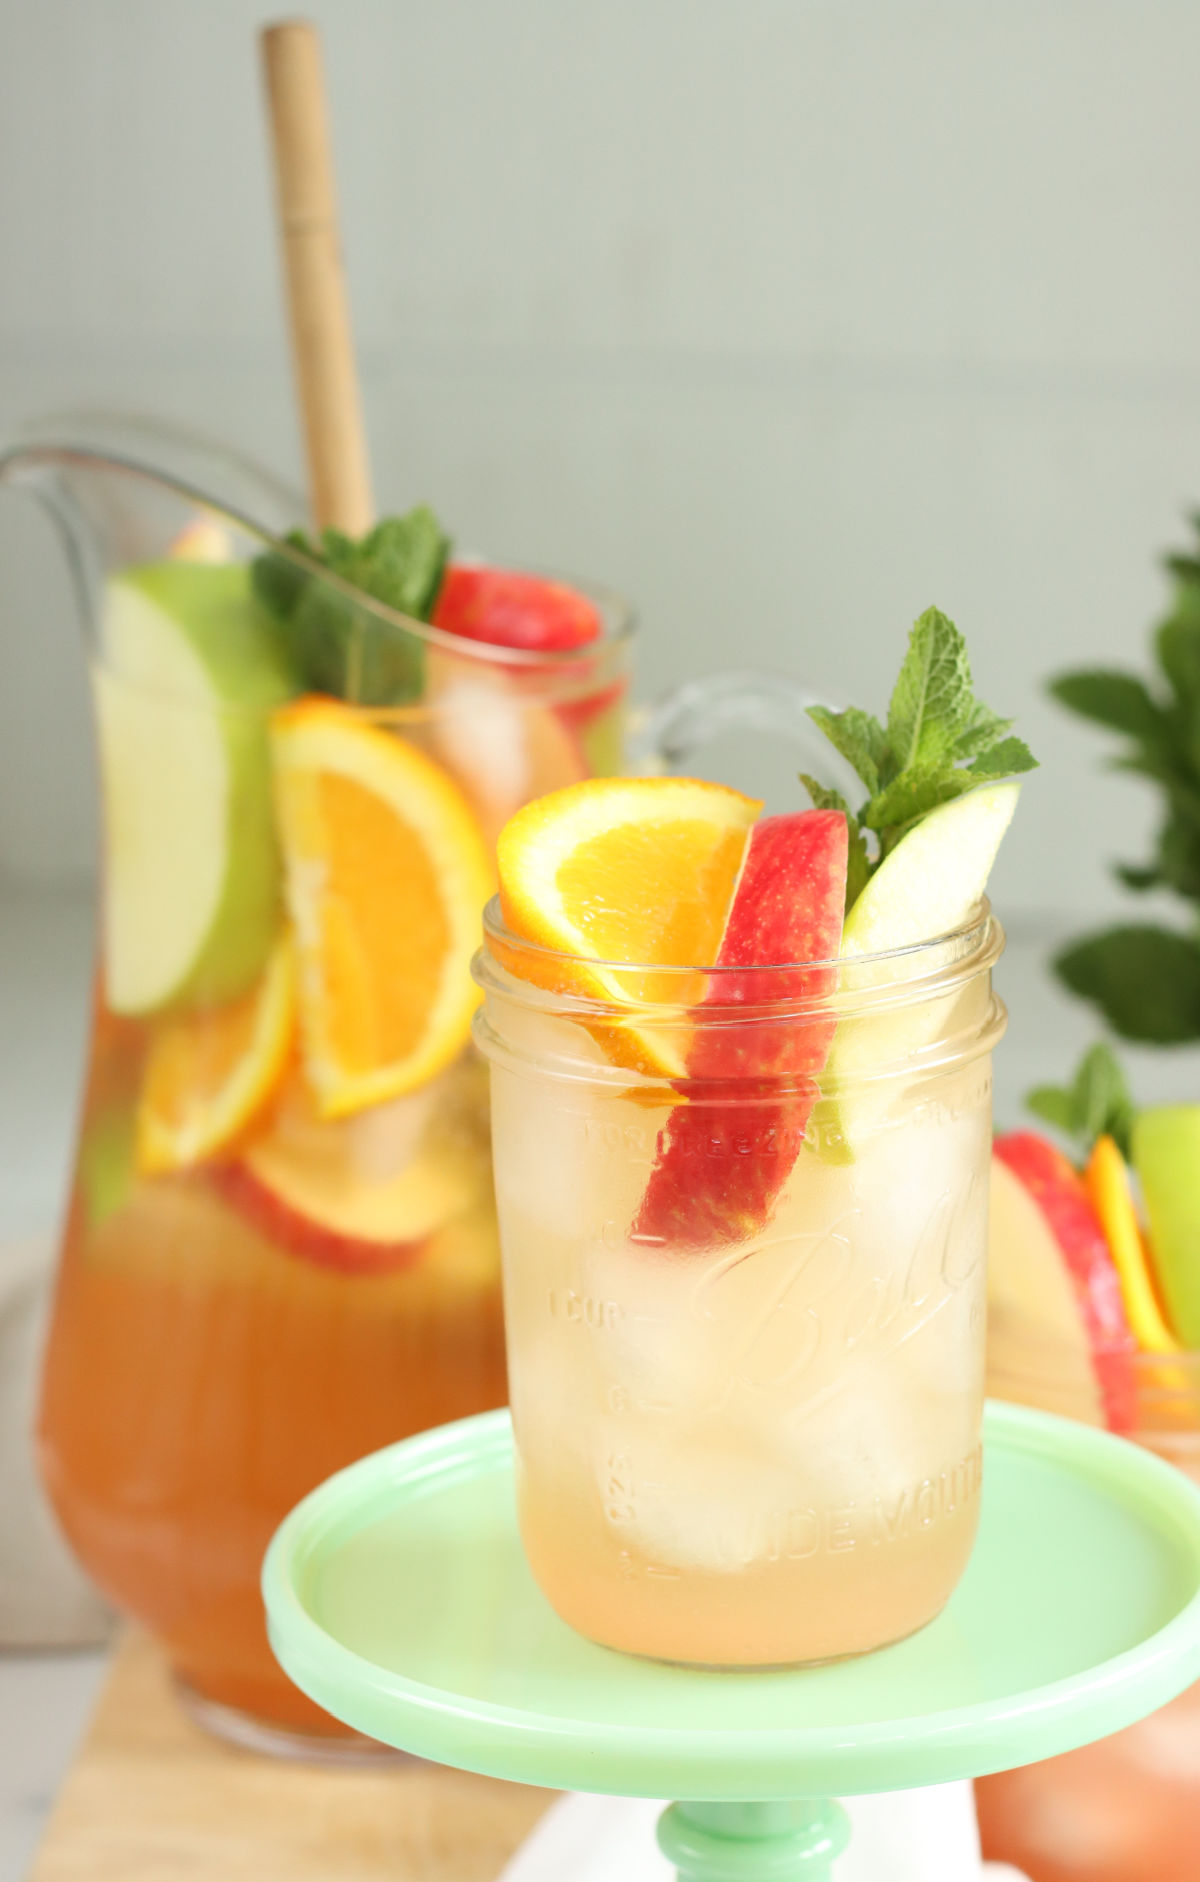 Close up of Pint Mason jar with sangria, apple and orange slices, pouring pitcher in background.